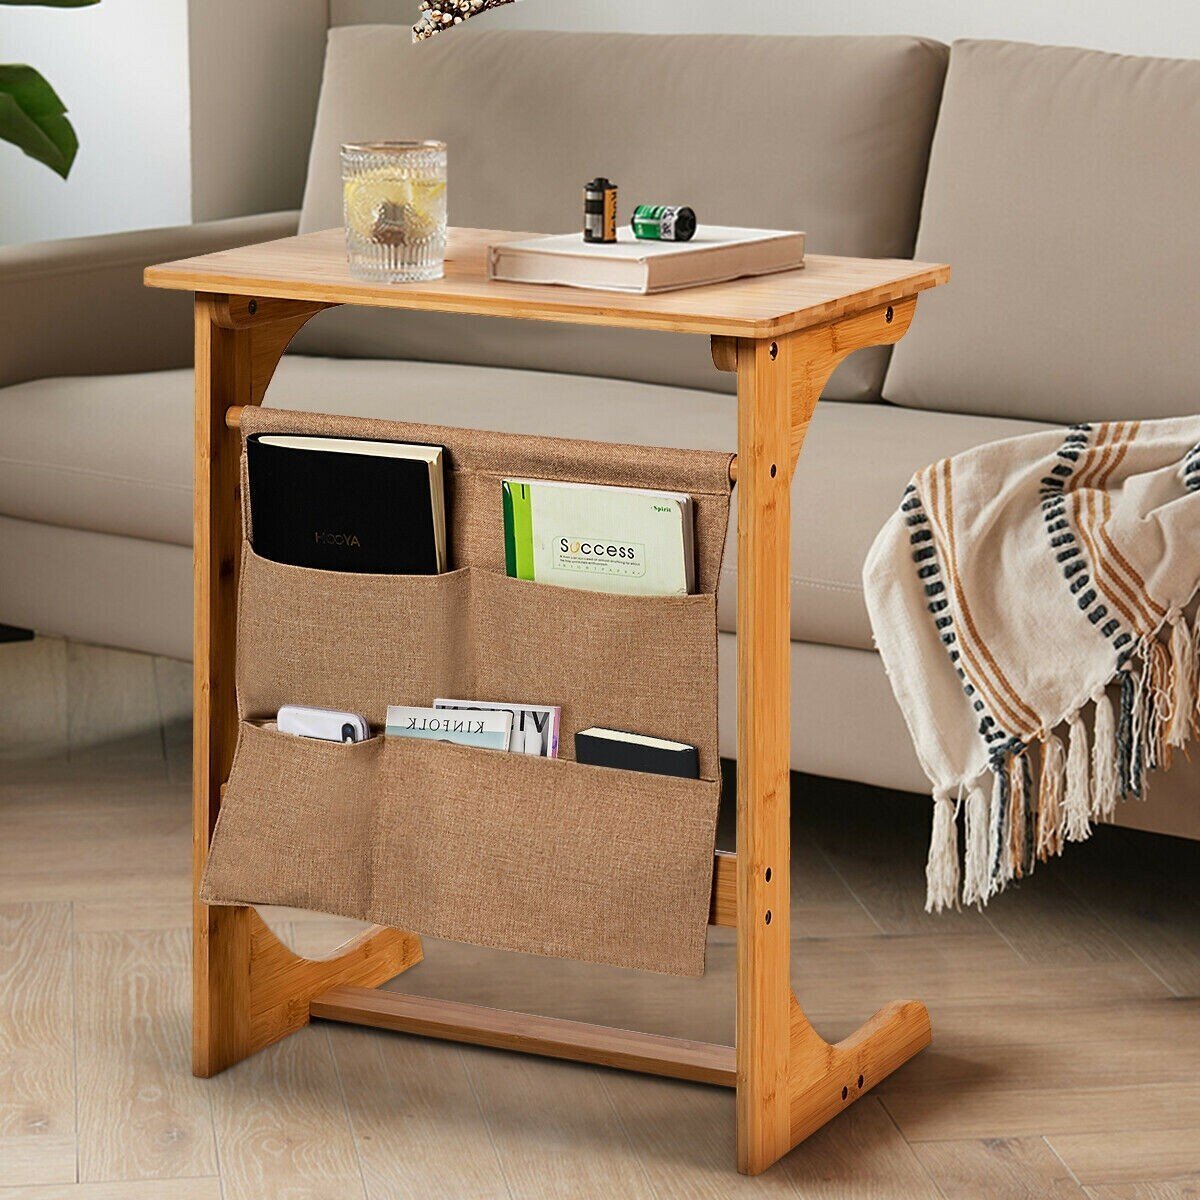 Narrow bamboo end table and desk